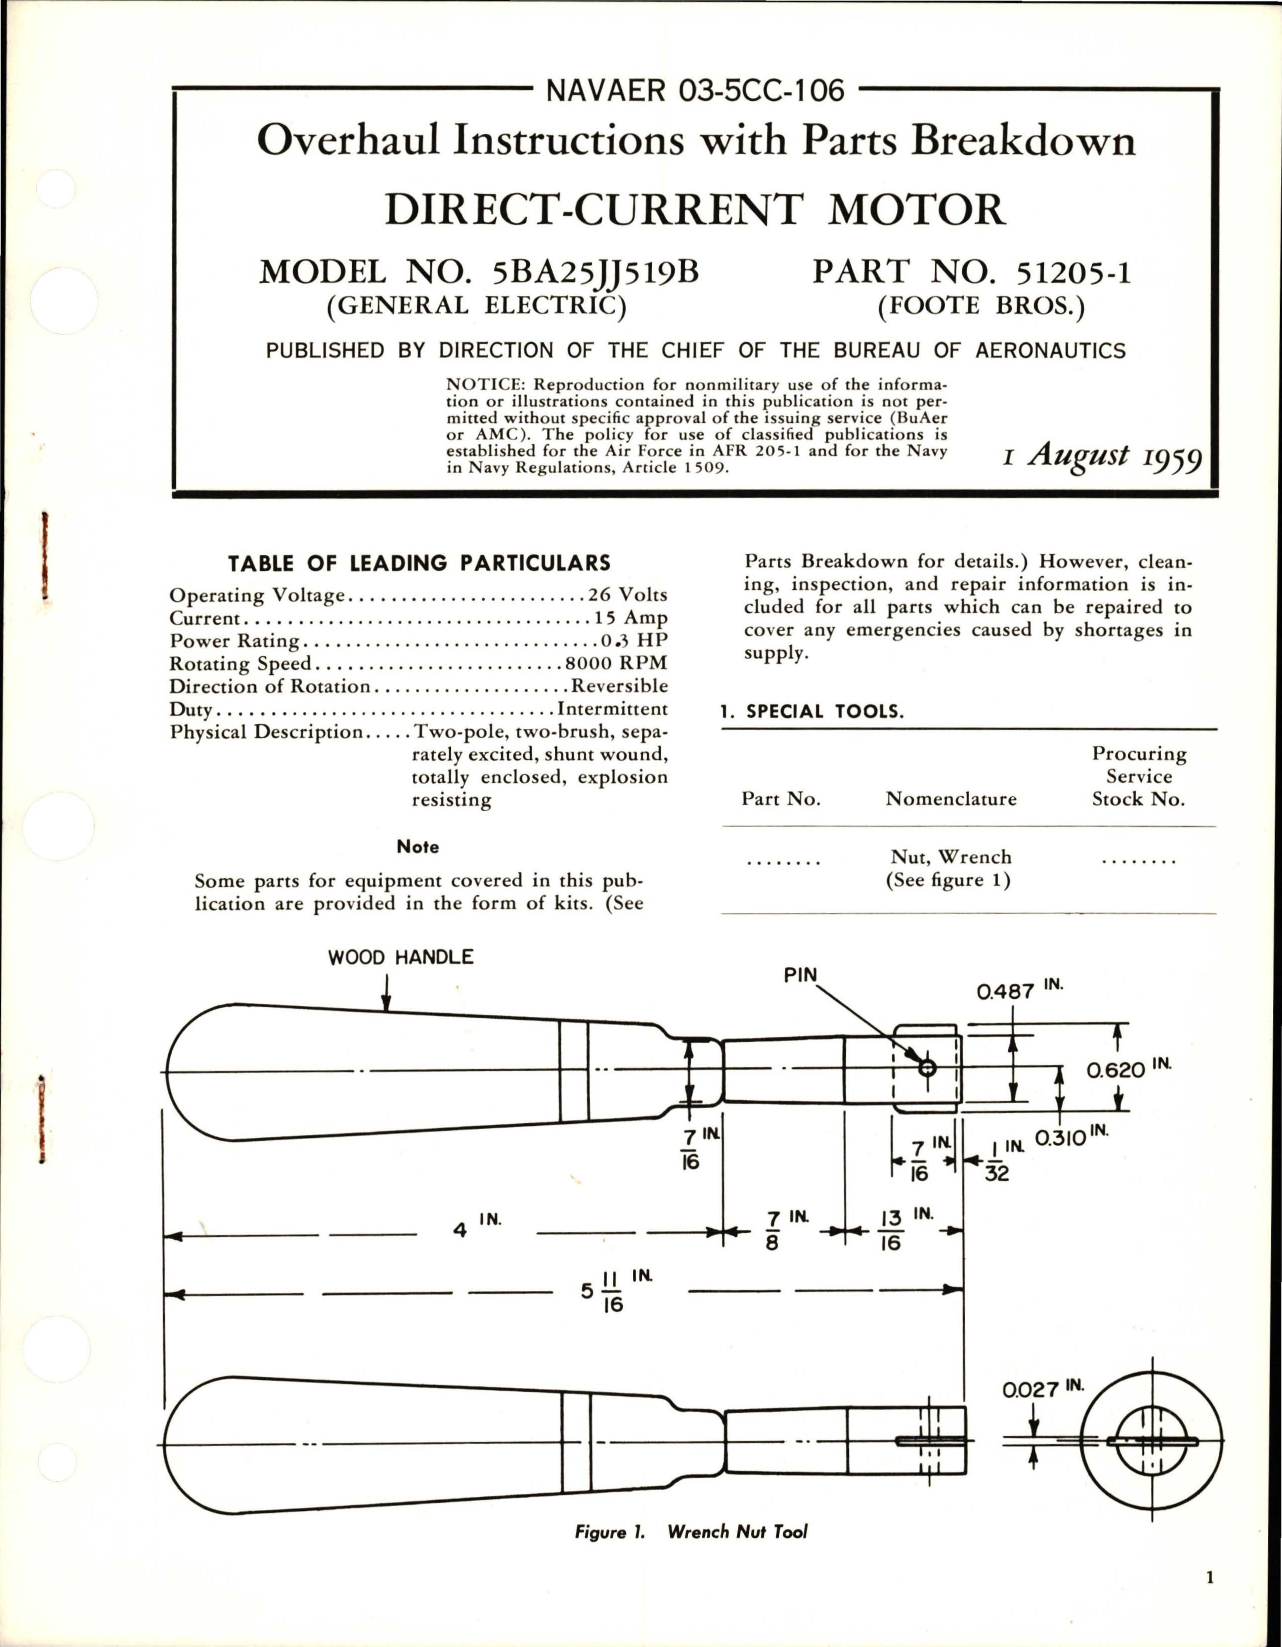 Sample page 1 from AirCorps Library document: Overhaul Instructions with Parts Breakdown for Direct Current Motor - Model 5BA25JJ519B - Part 51205-1